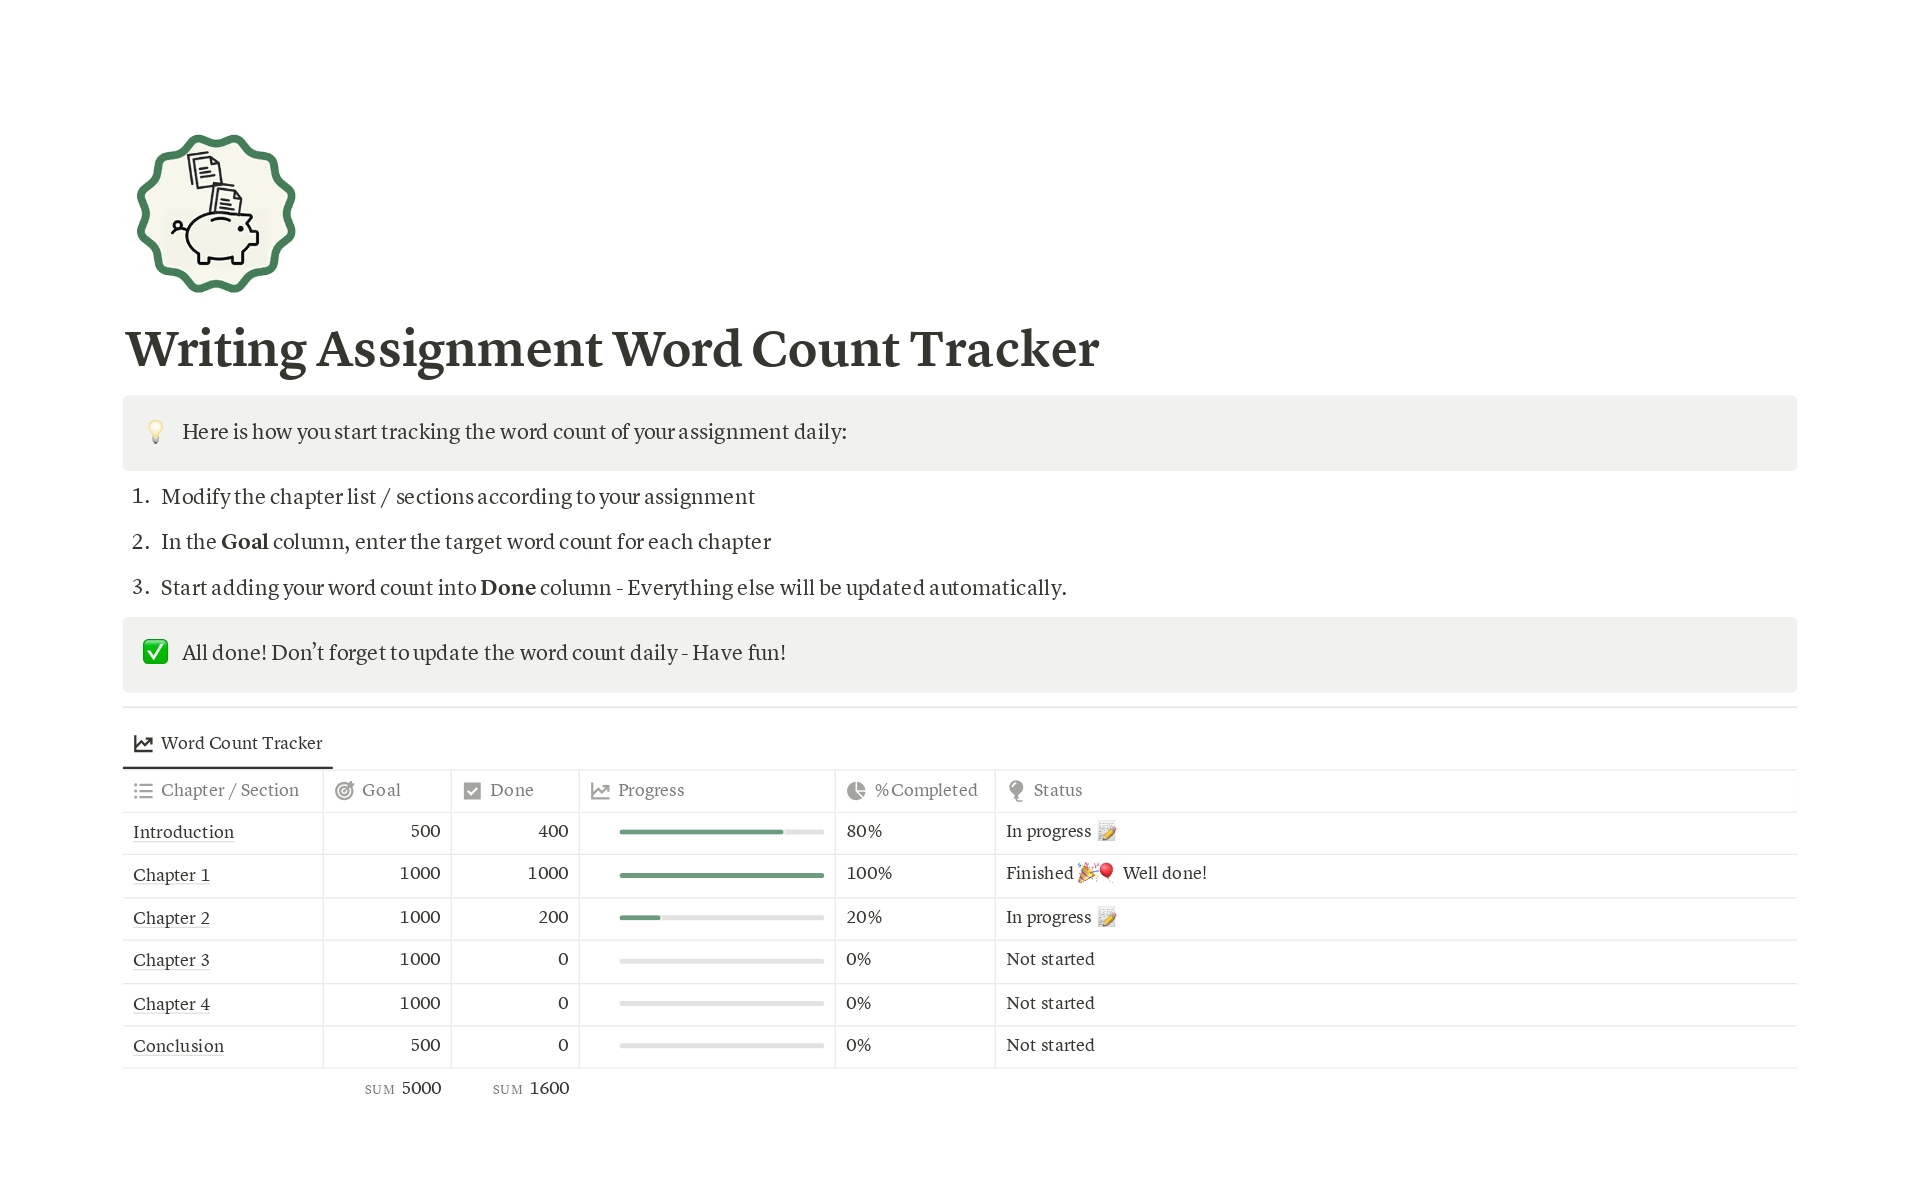 Whether you're a student, a PhD candidate, or a writer embarking on your next masterpiece, this simple tracker is your trusty companion. Set your word count goals, log your daily progress, and watch your writing journey come to life with visual charts.
